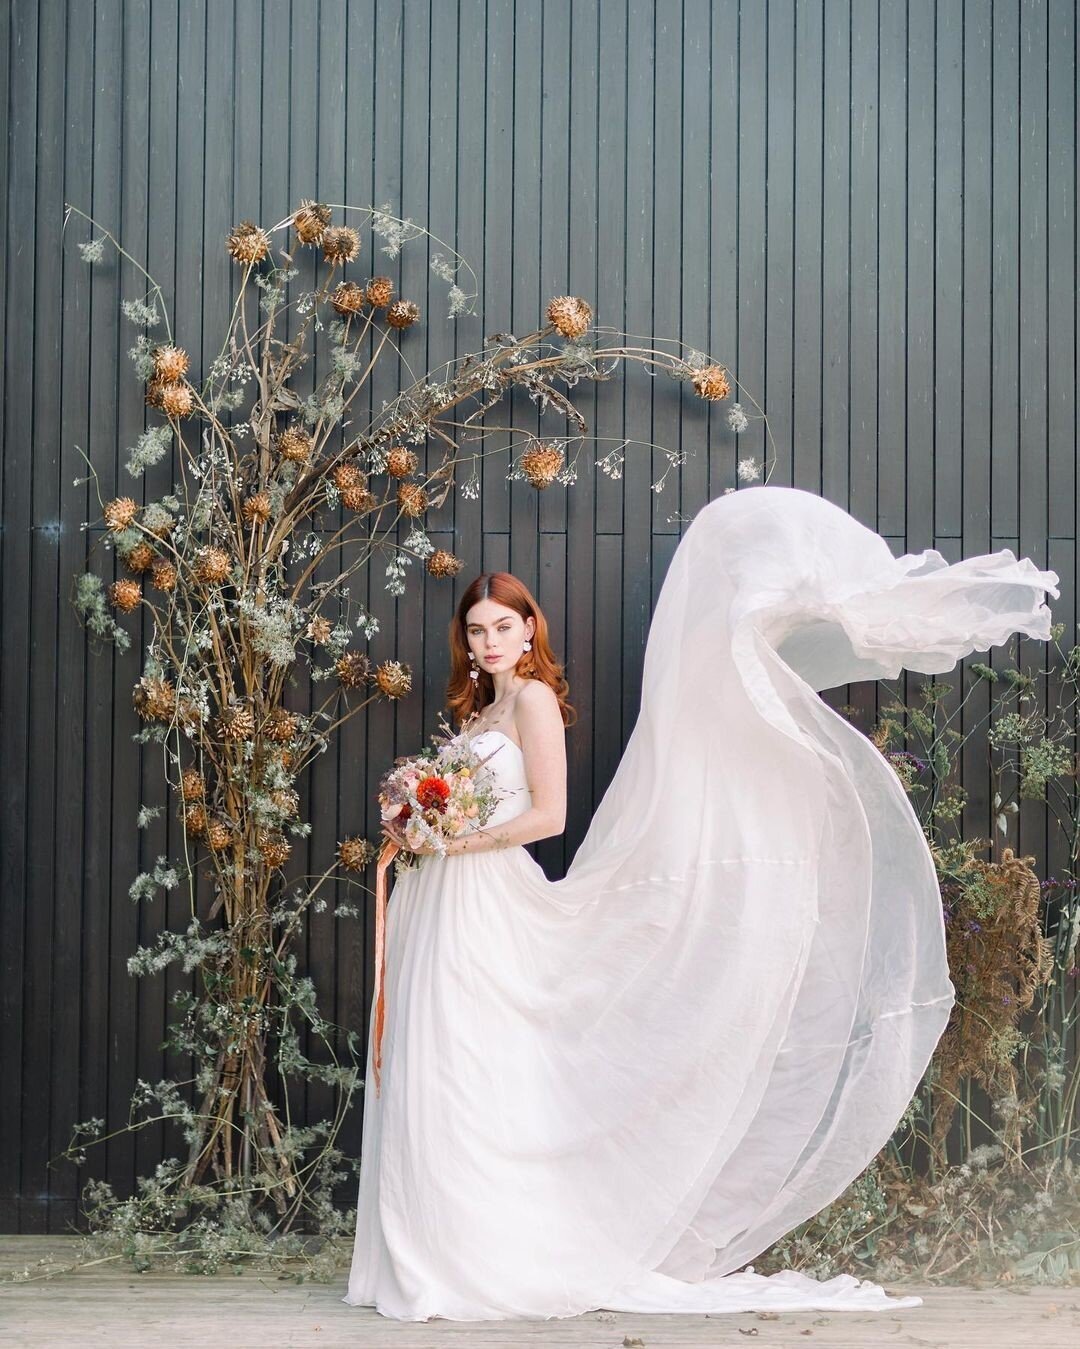 The kind of images that have us stopping in our scroll. From the movement of her gown to the way that floral installation arches inwards -- every bit of this capture has been planned with thought and intention. ⠀⠀⠀⠀⠀⠀⠀⠀⠀
⠀⠀⠀⠀⠀⠀⠀⠀⠀
Image by: @jobradbu